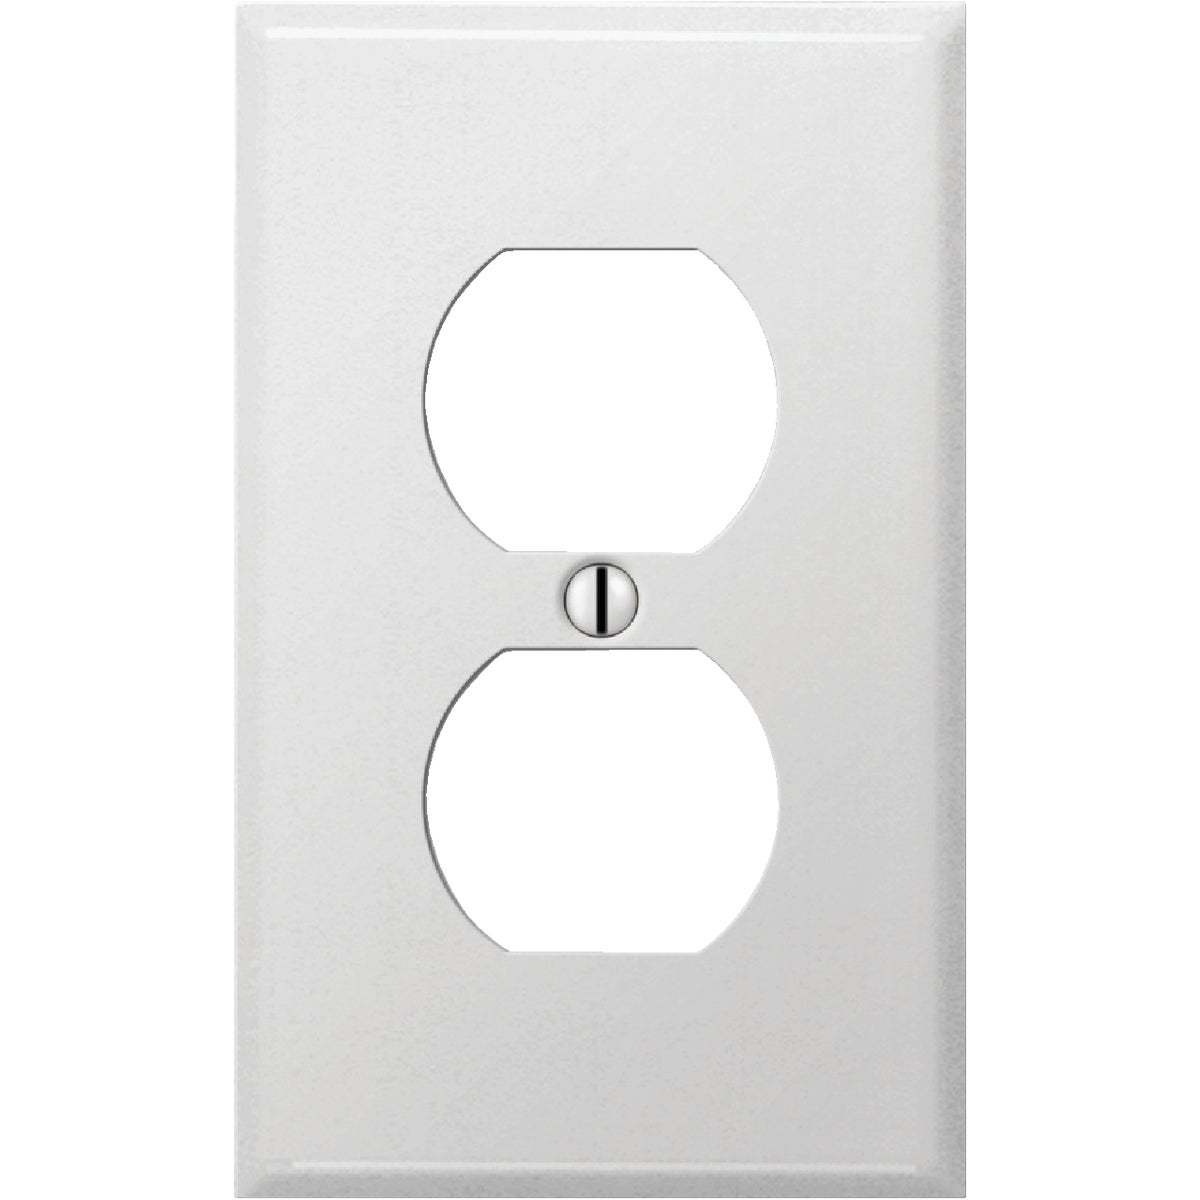 Item 500402, Stamped steel duplex outlet wall plate.